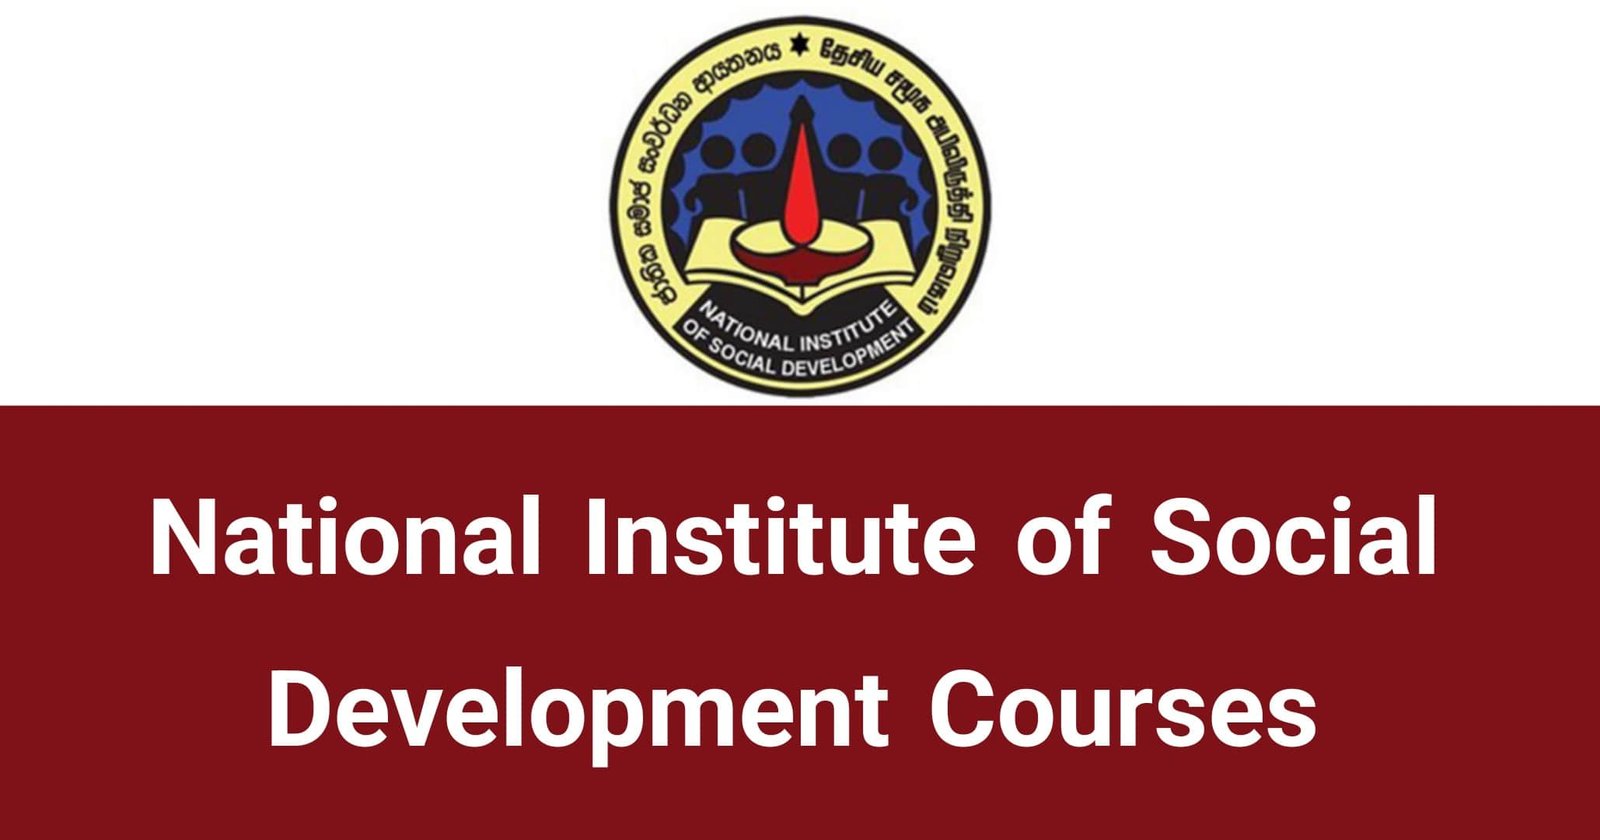 National Institute of Social Development Courses